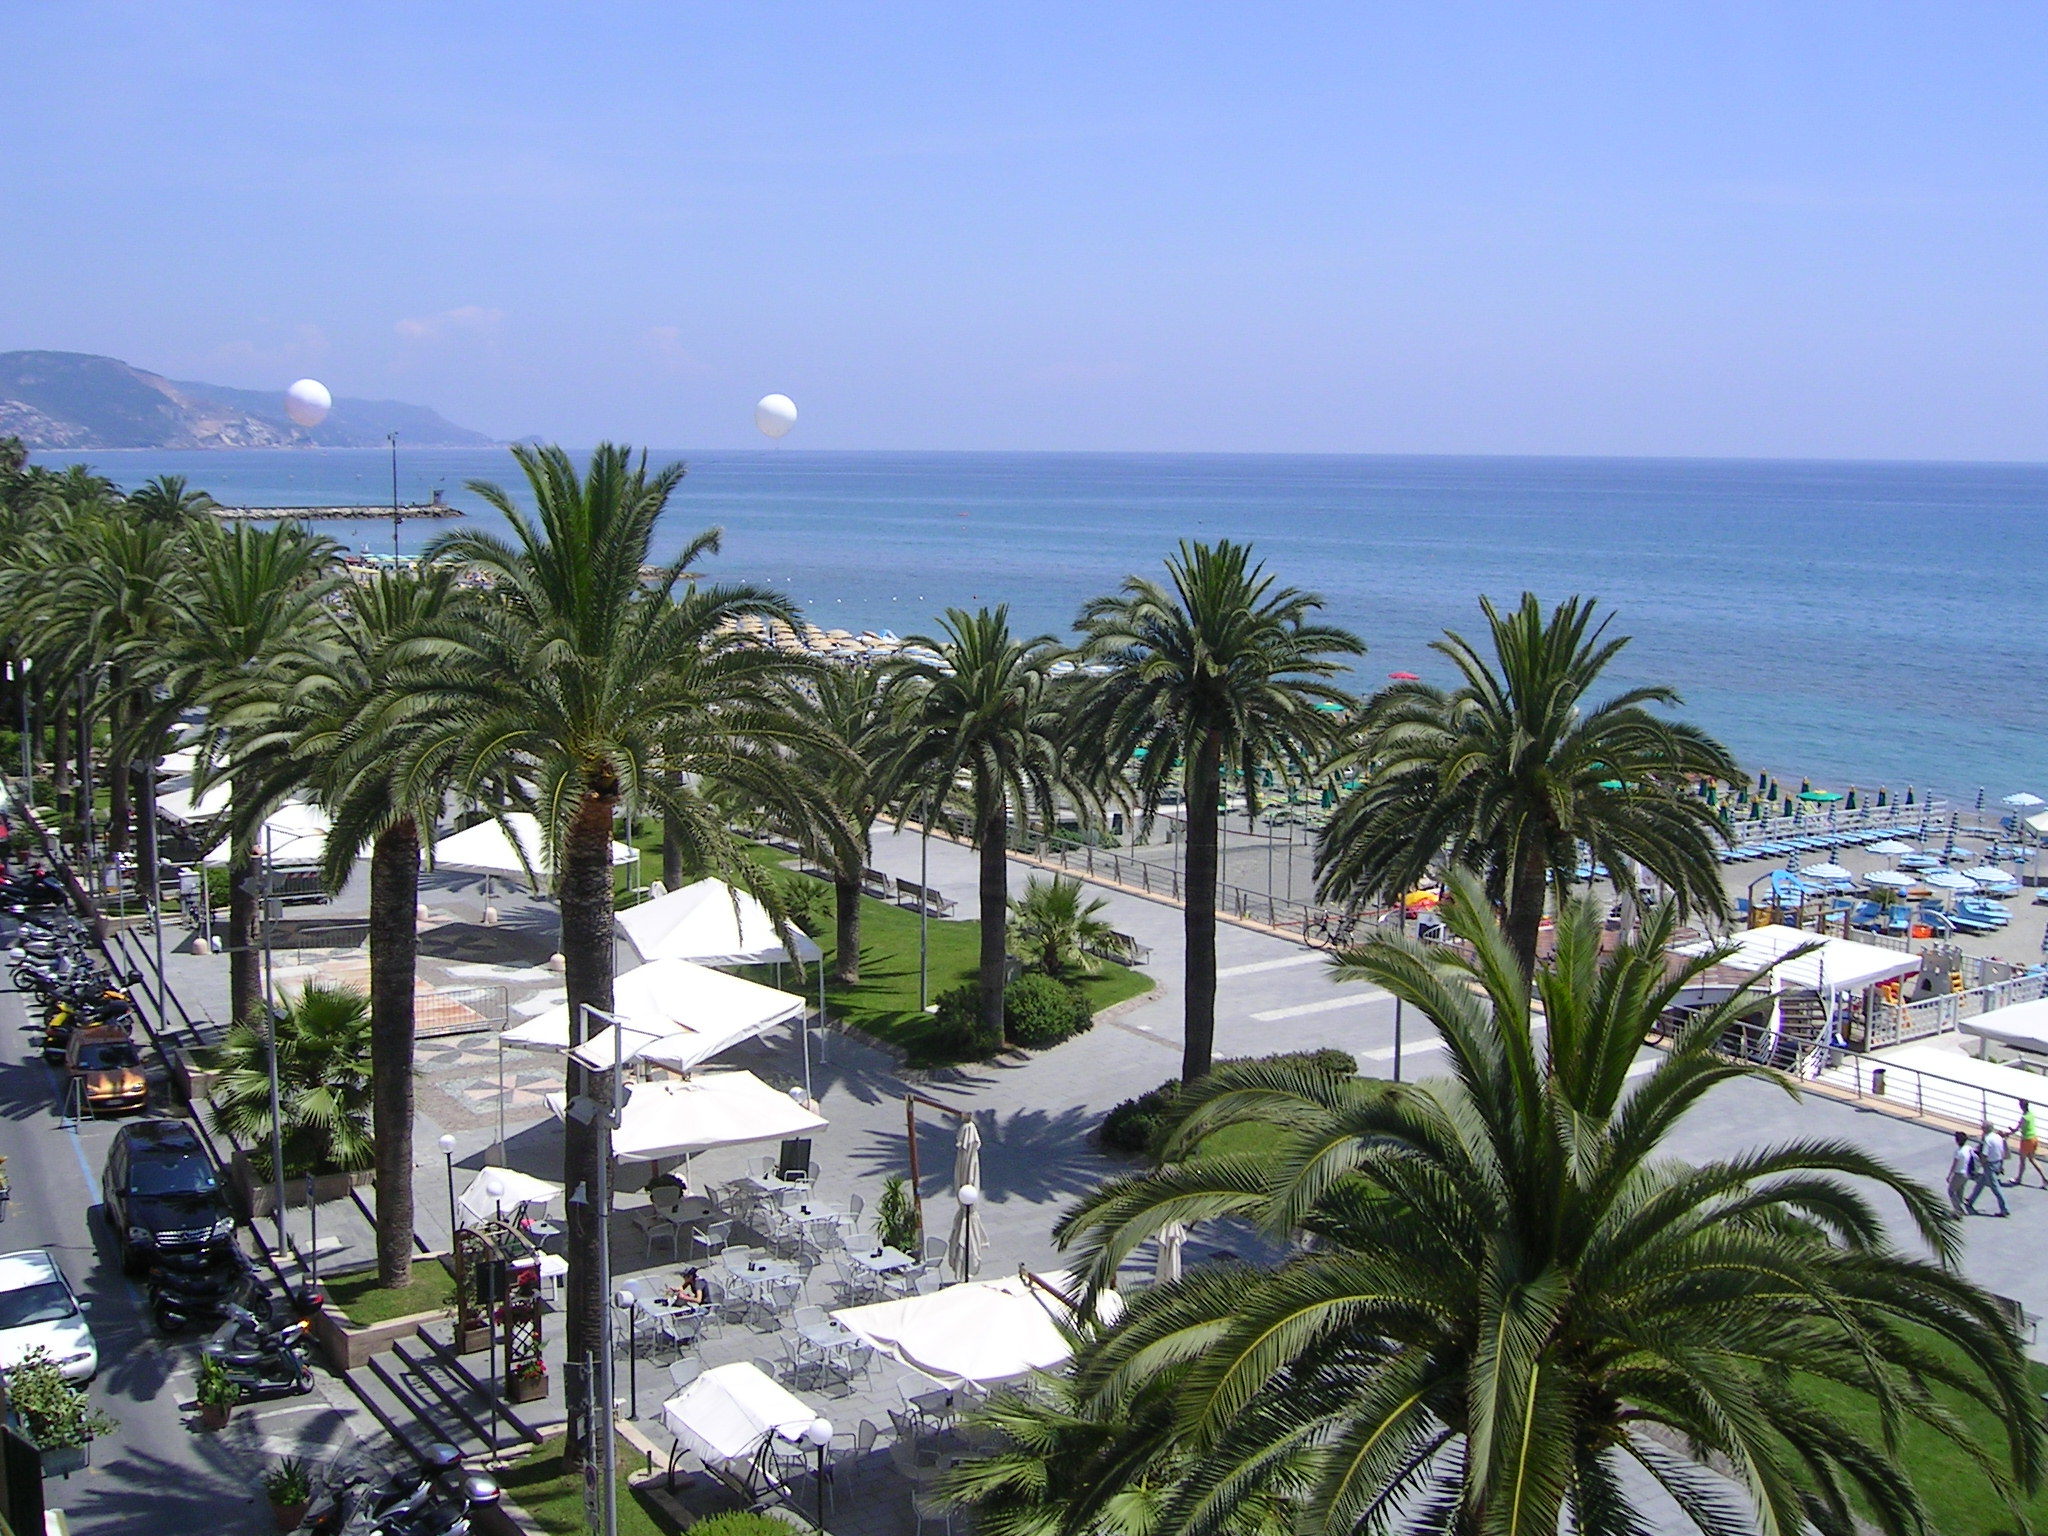 Palm trees on the beach in Loano, Italy